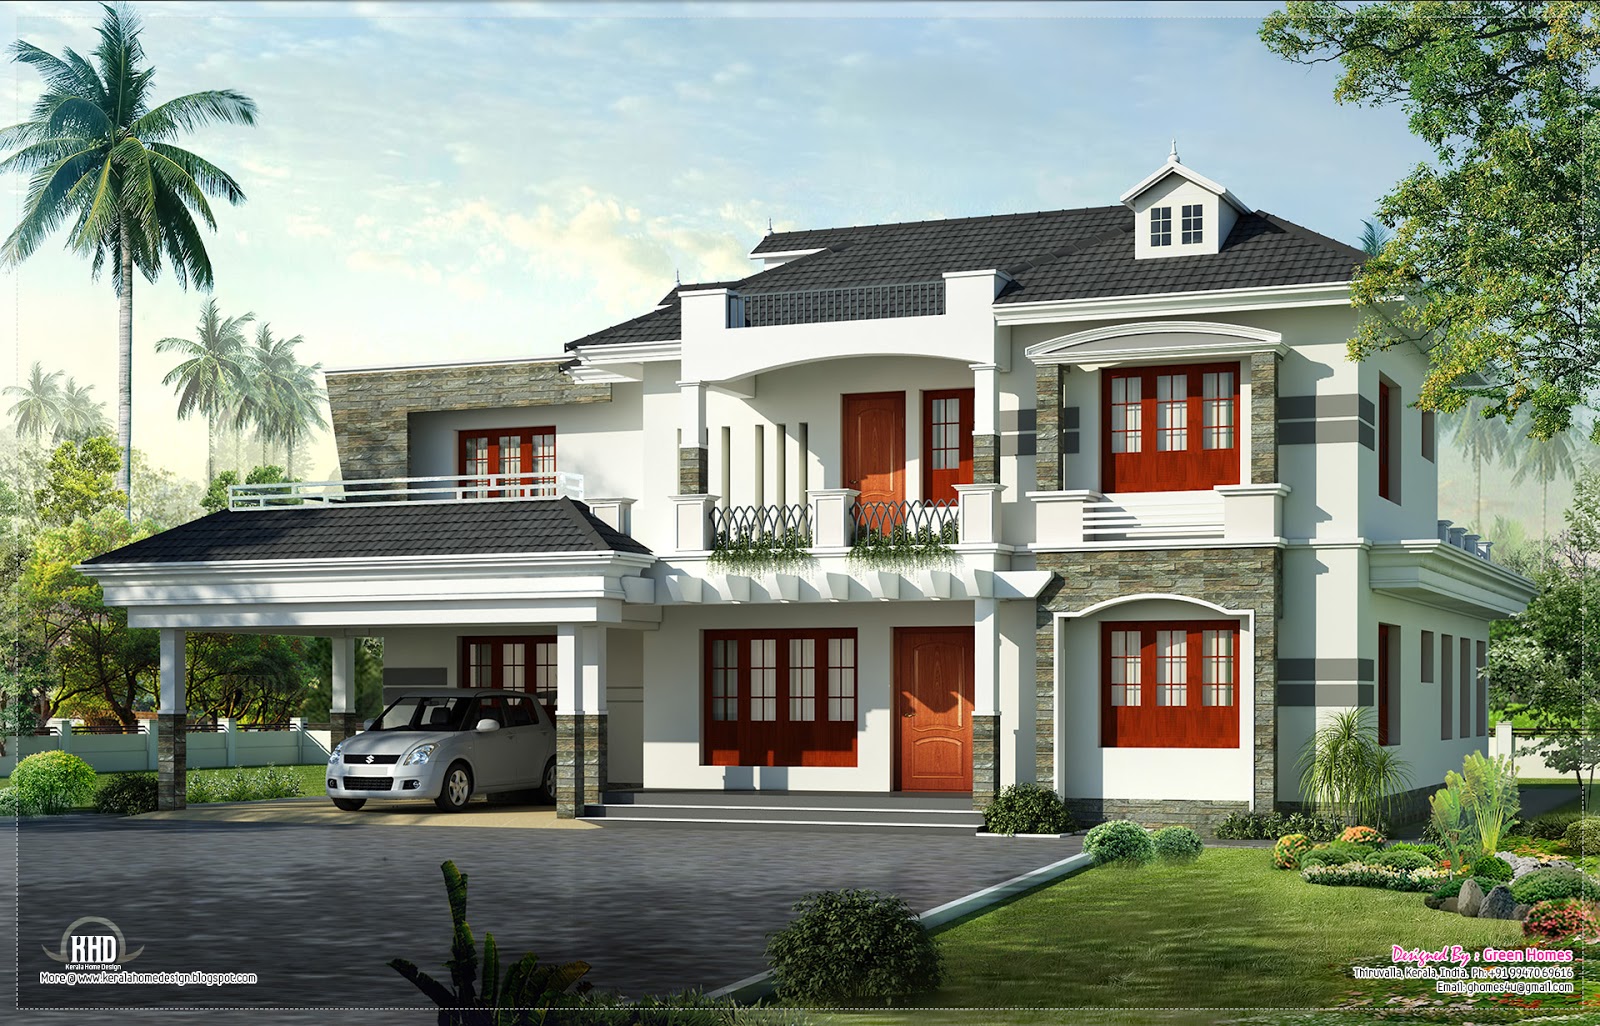  New  style  Kerala  luxury home  exterior House  Design  Plans 